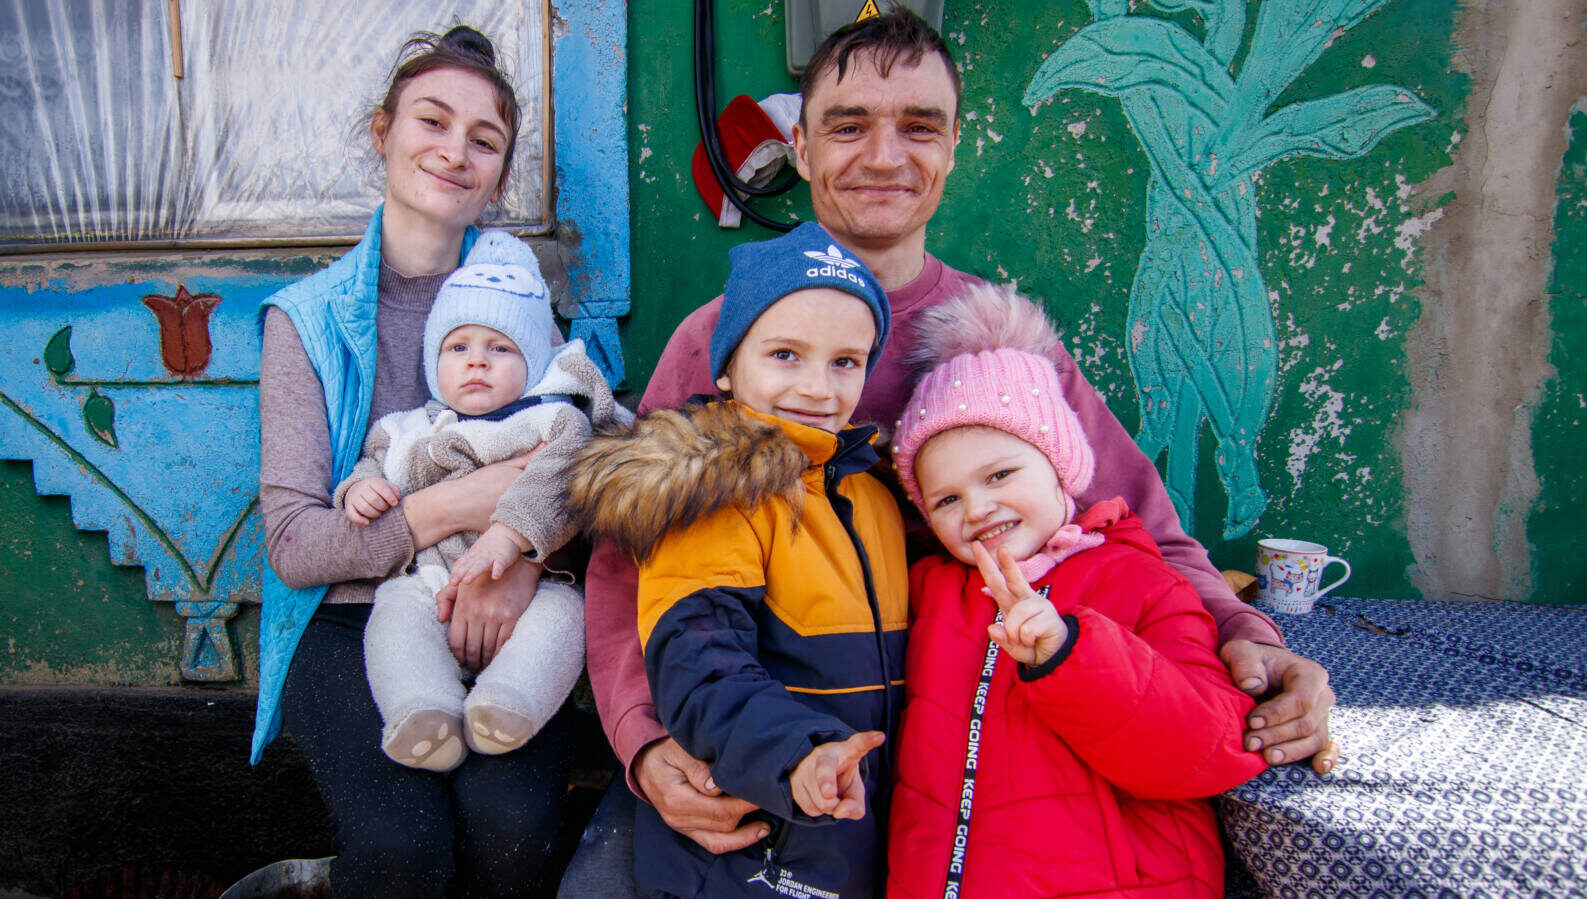 Ukrainian refugees in Moldova. Dressed in winter gear, the father embraces his two children while the mother holds a baby.